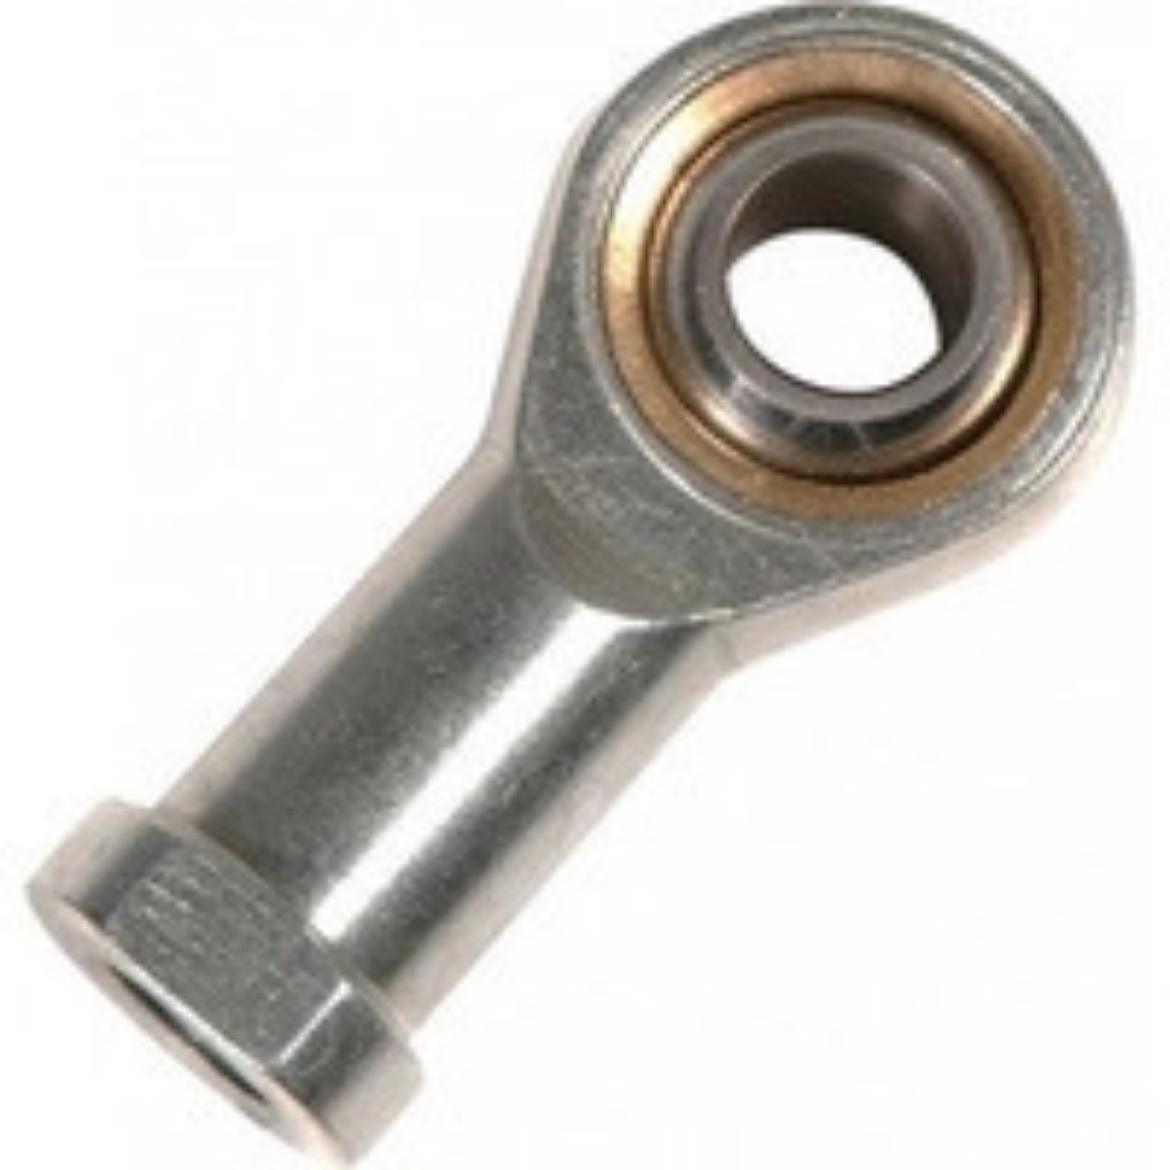 Picture of ROD END RH 3/8 BORE, 3/8-24 FEMALE END